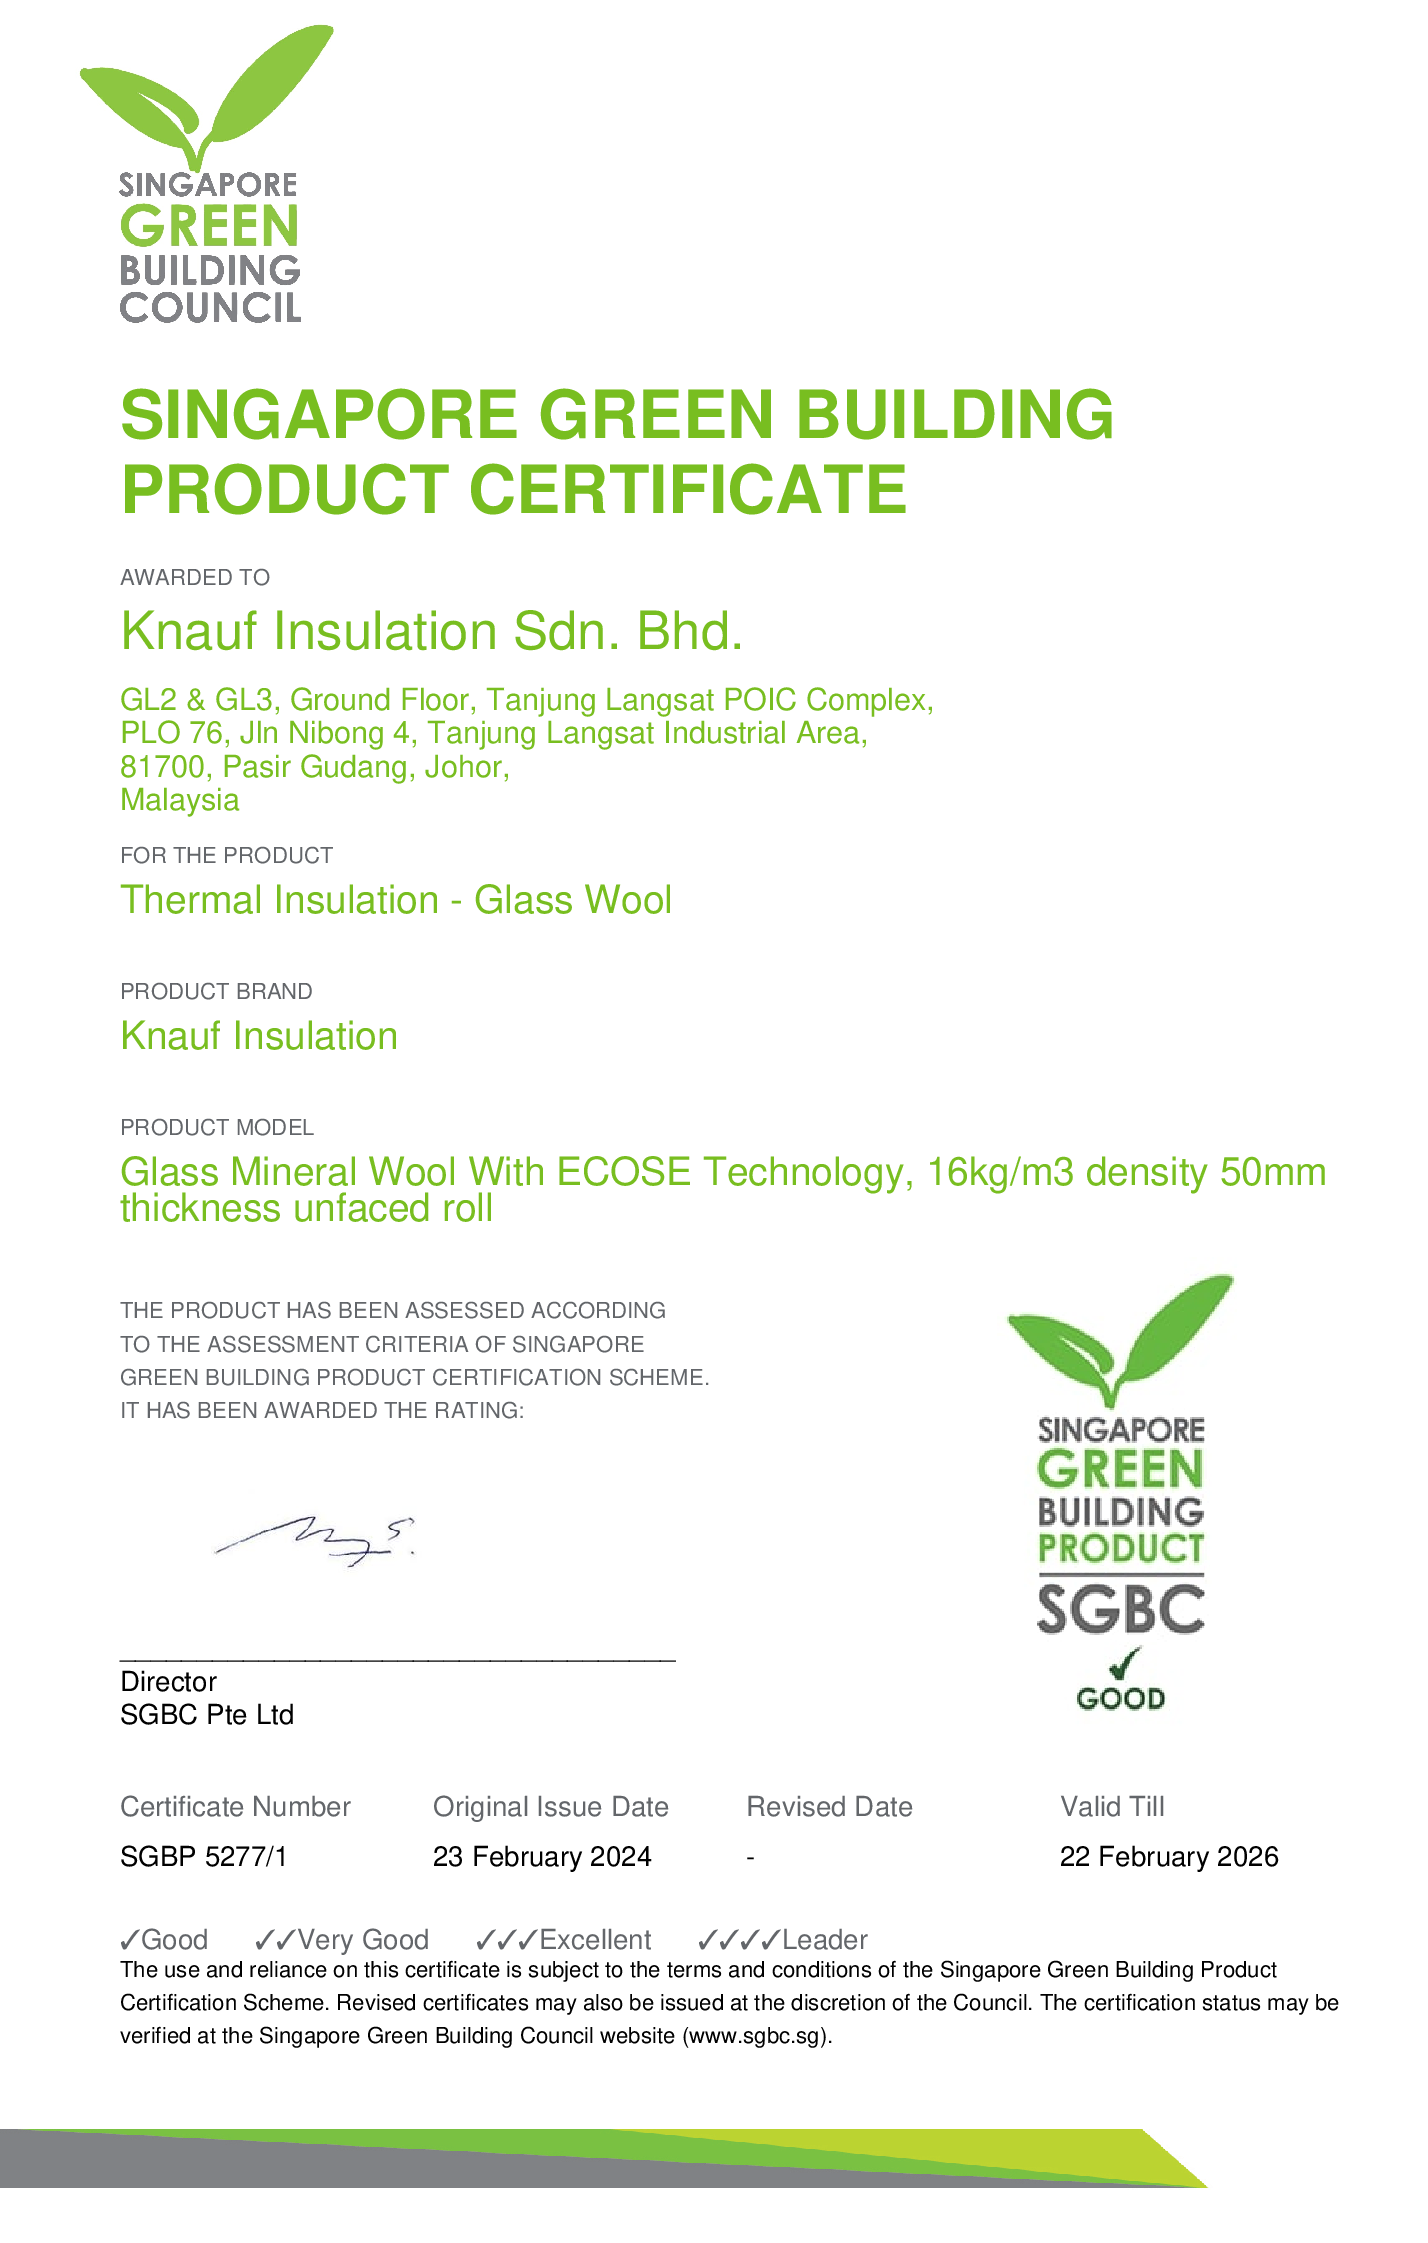 Singapore Green Building Product Certificate – Unfaced Glasswool – 16kg/m3 - 50mm